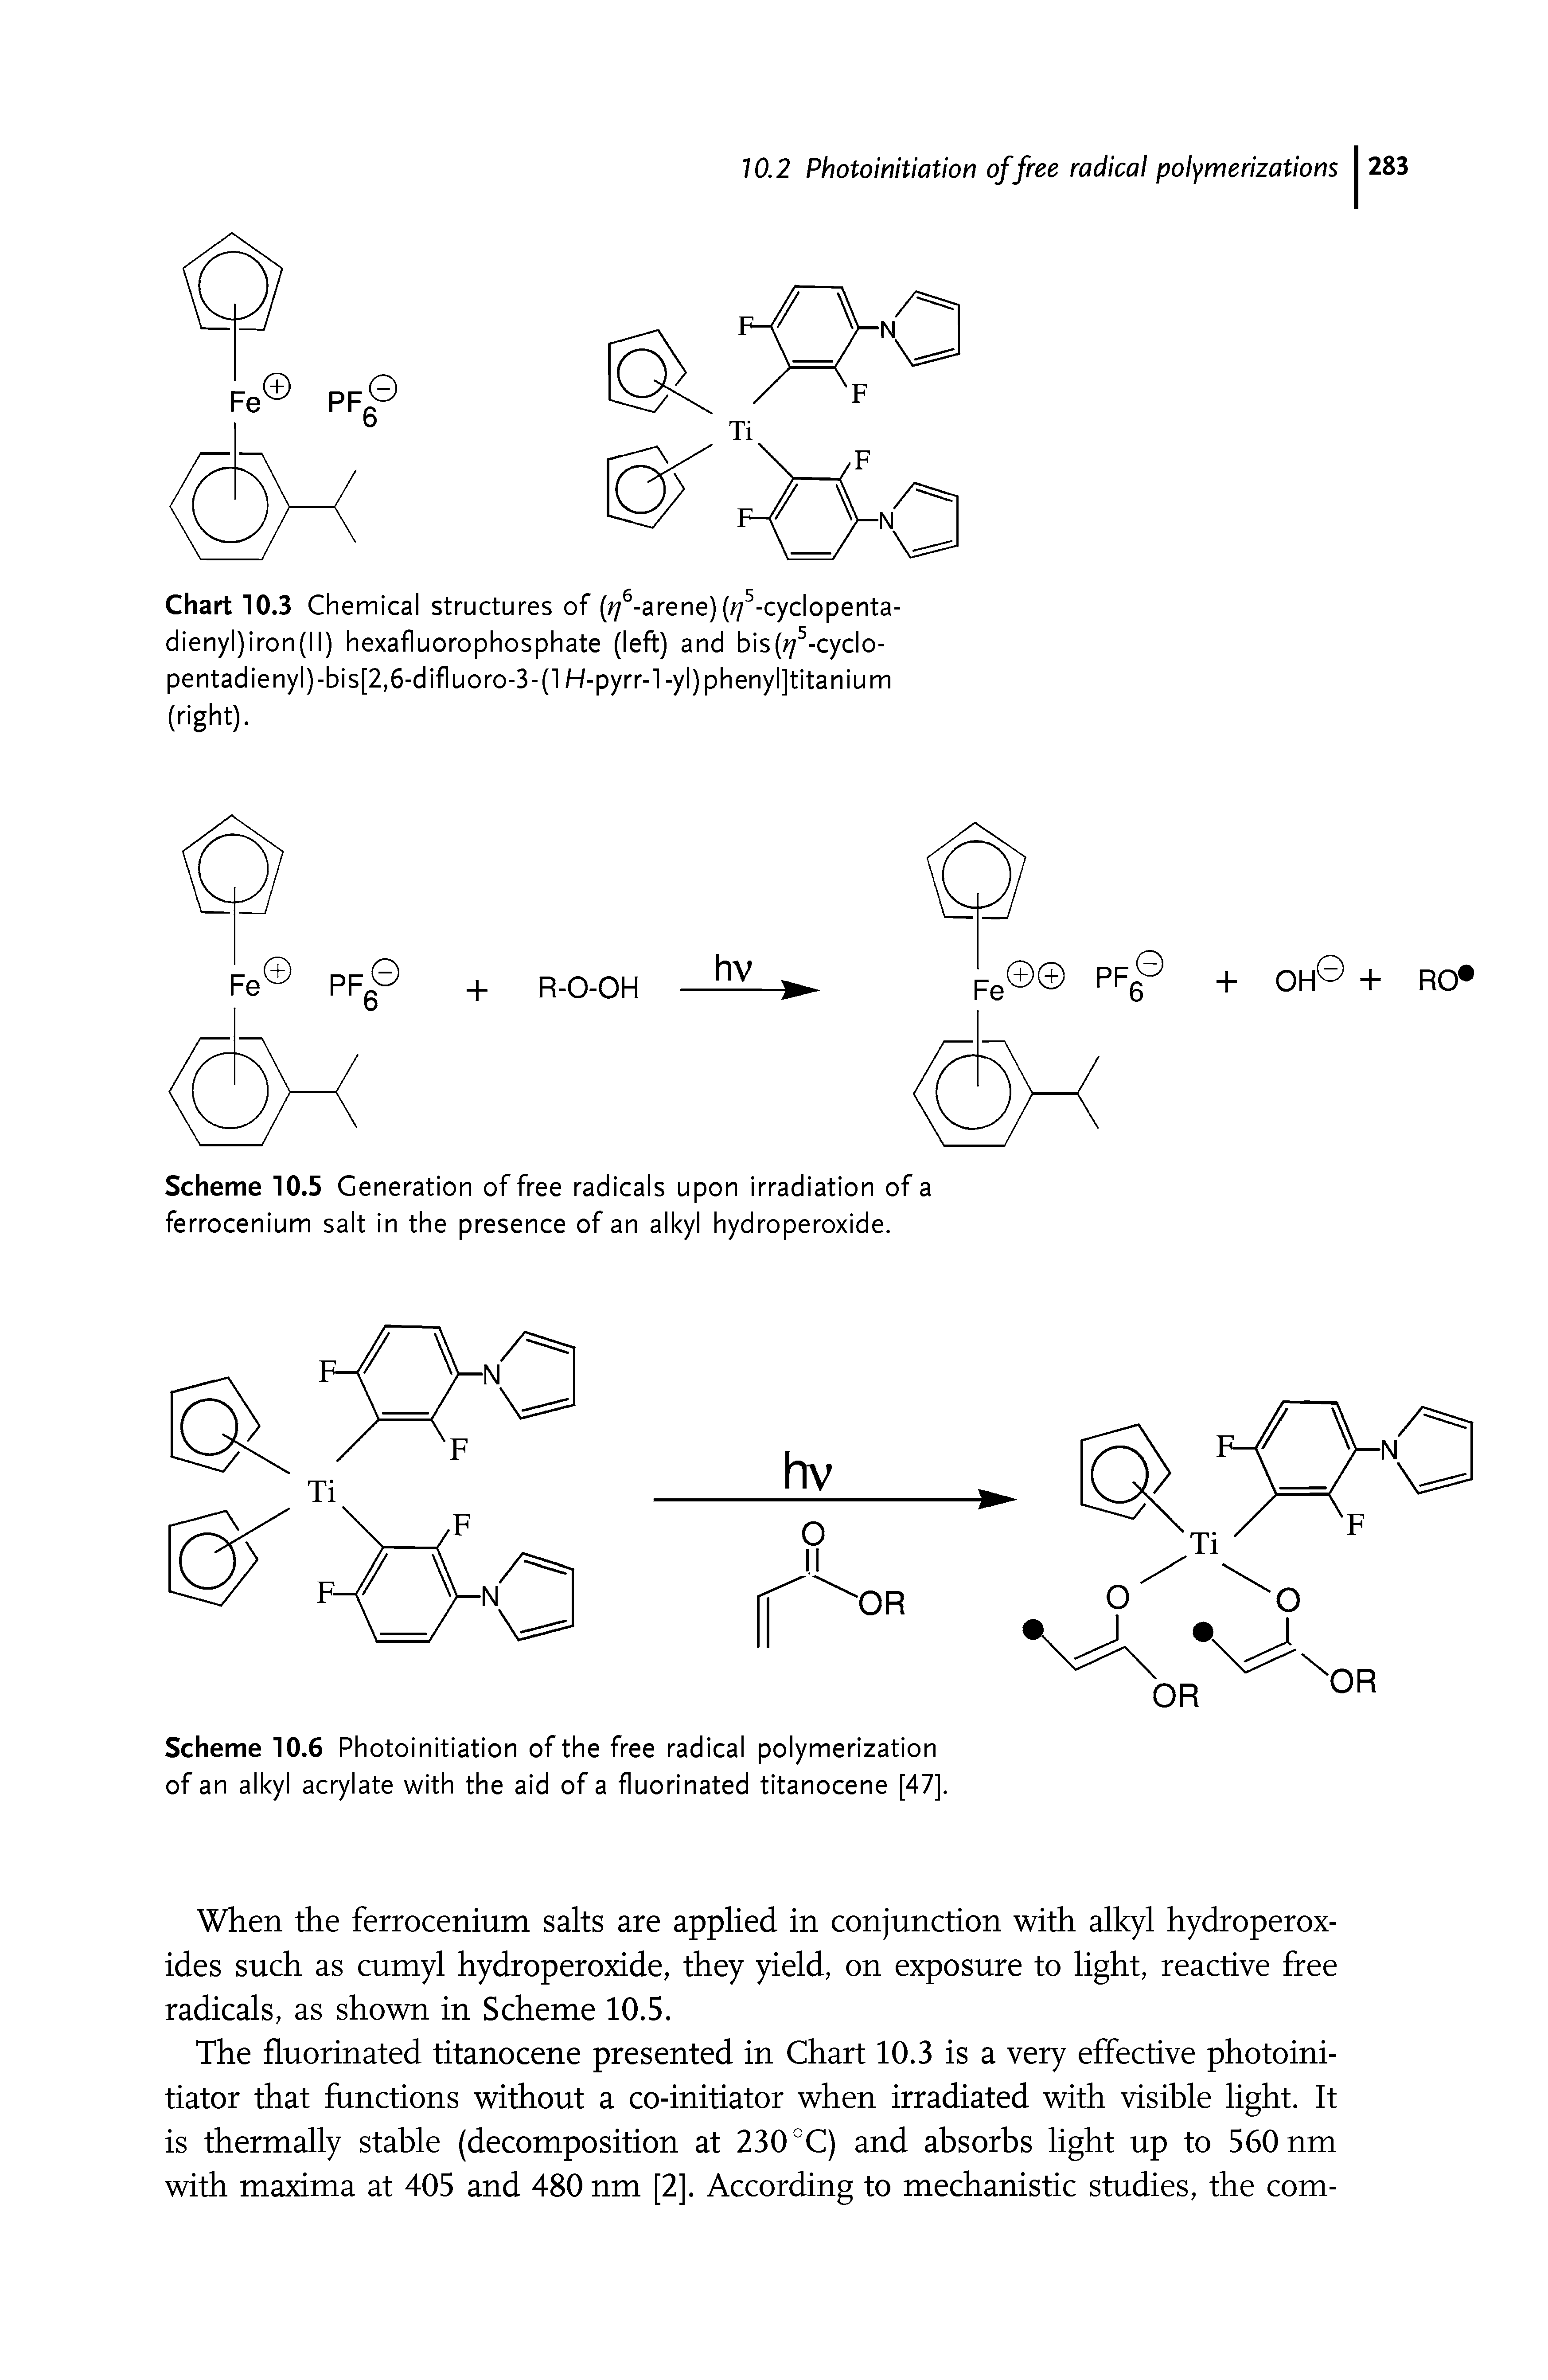 Scheme 10.6 Photoinitiation of the free radical polymerization of an alkyl acrylate with the aid of a fluorinated titanocene [47].